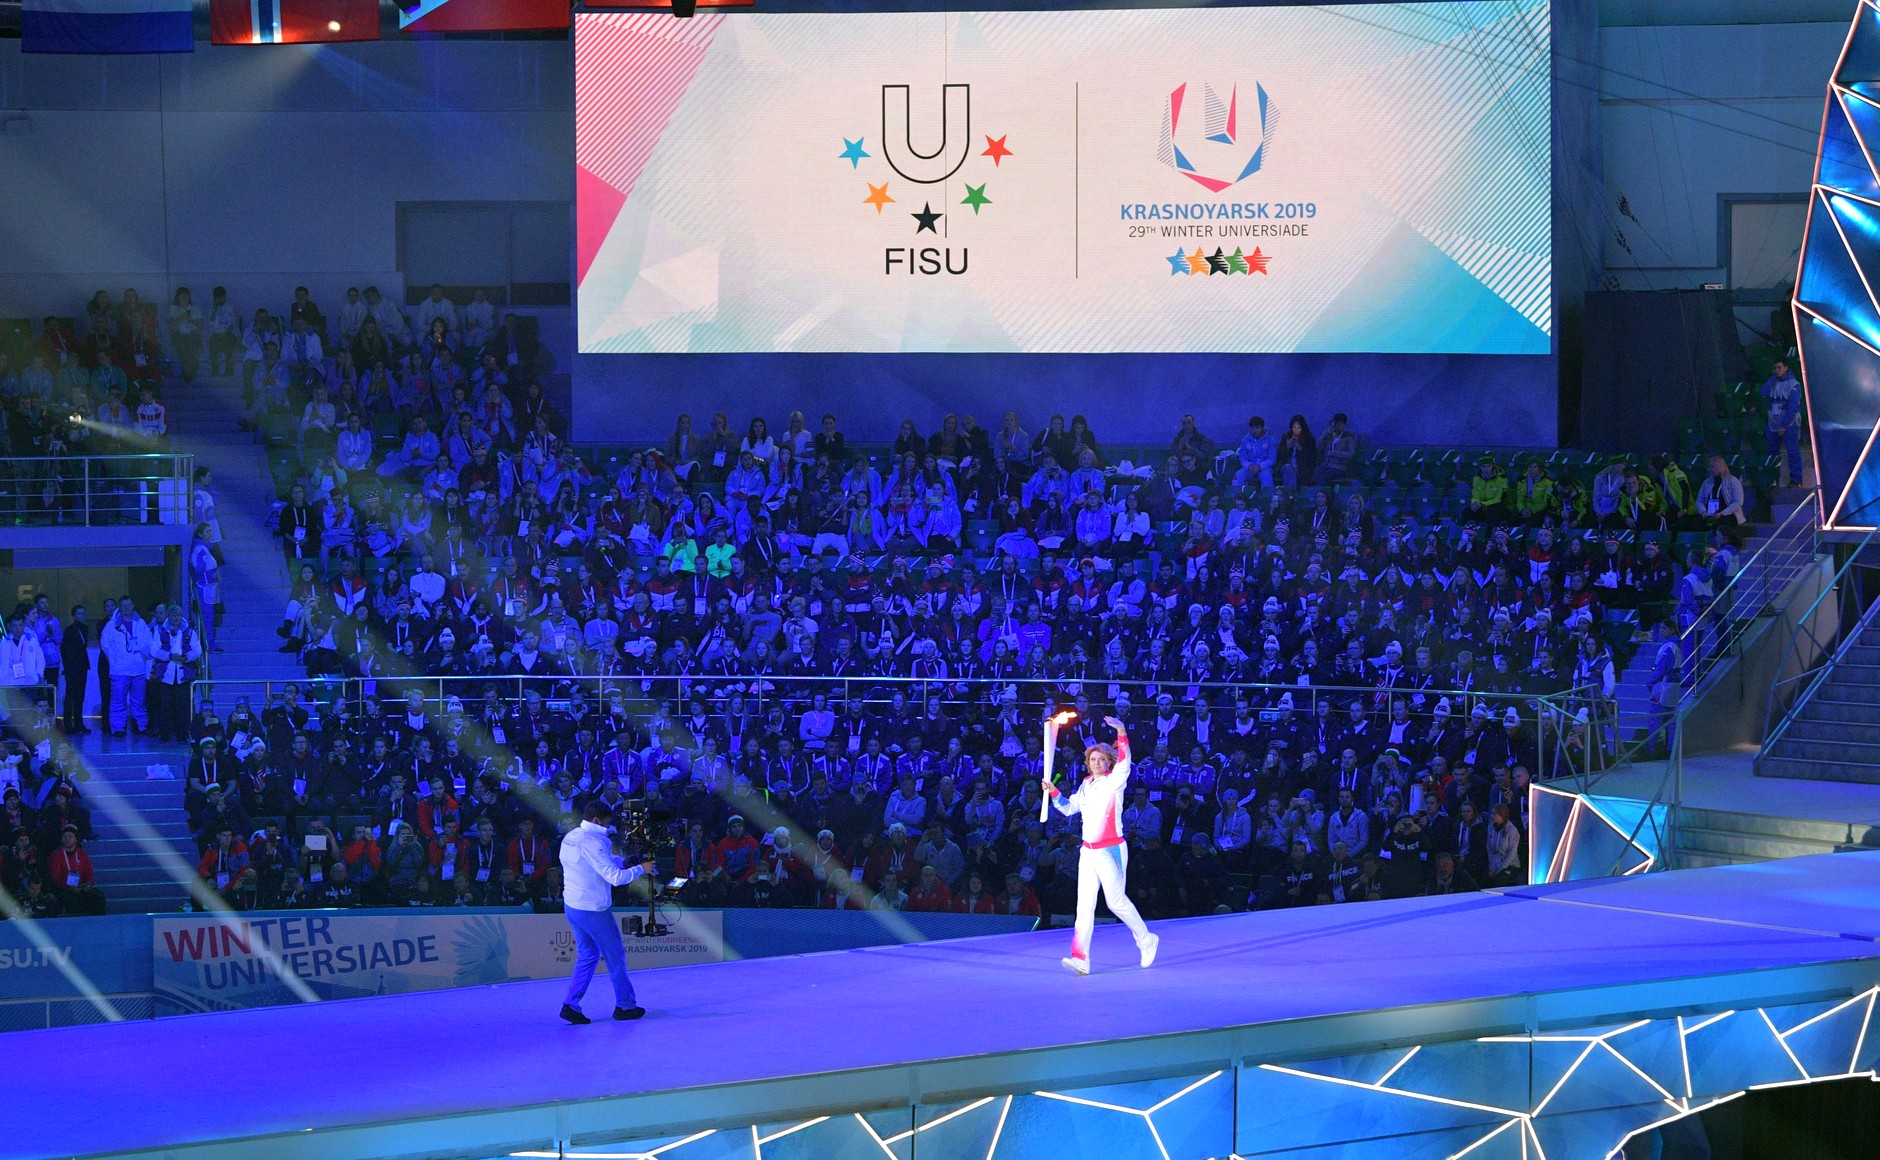 Rostec Prevented 2.5 Cyberattacks During Universiade